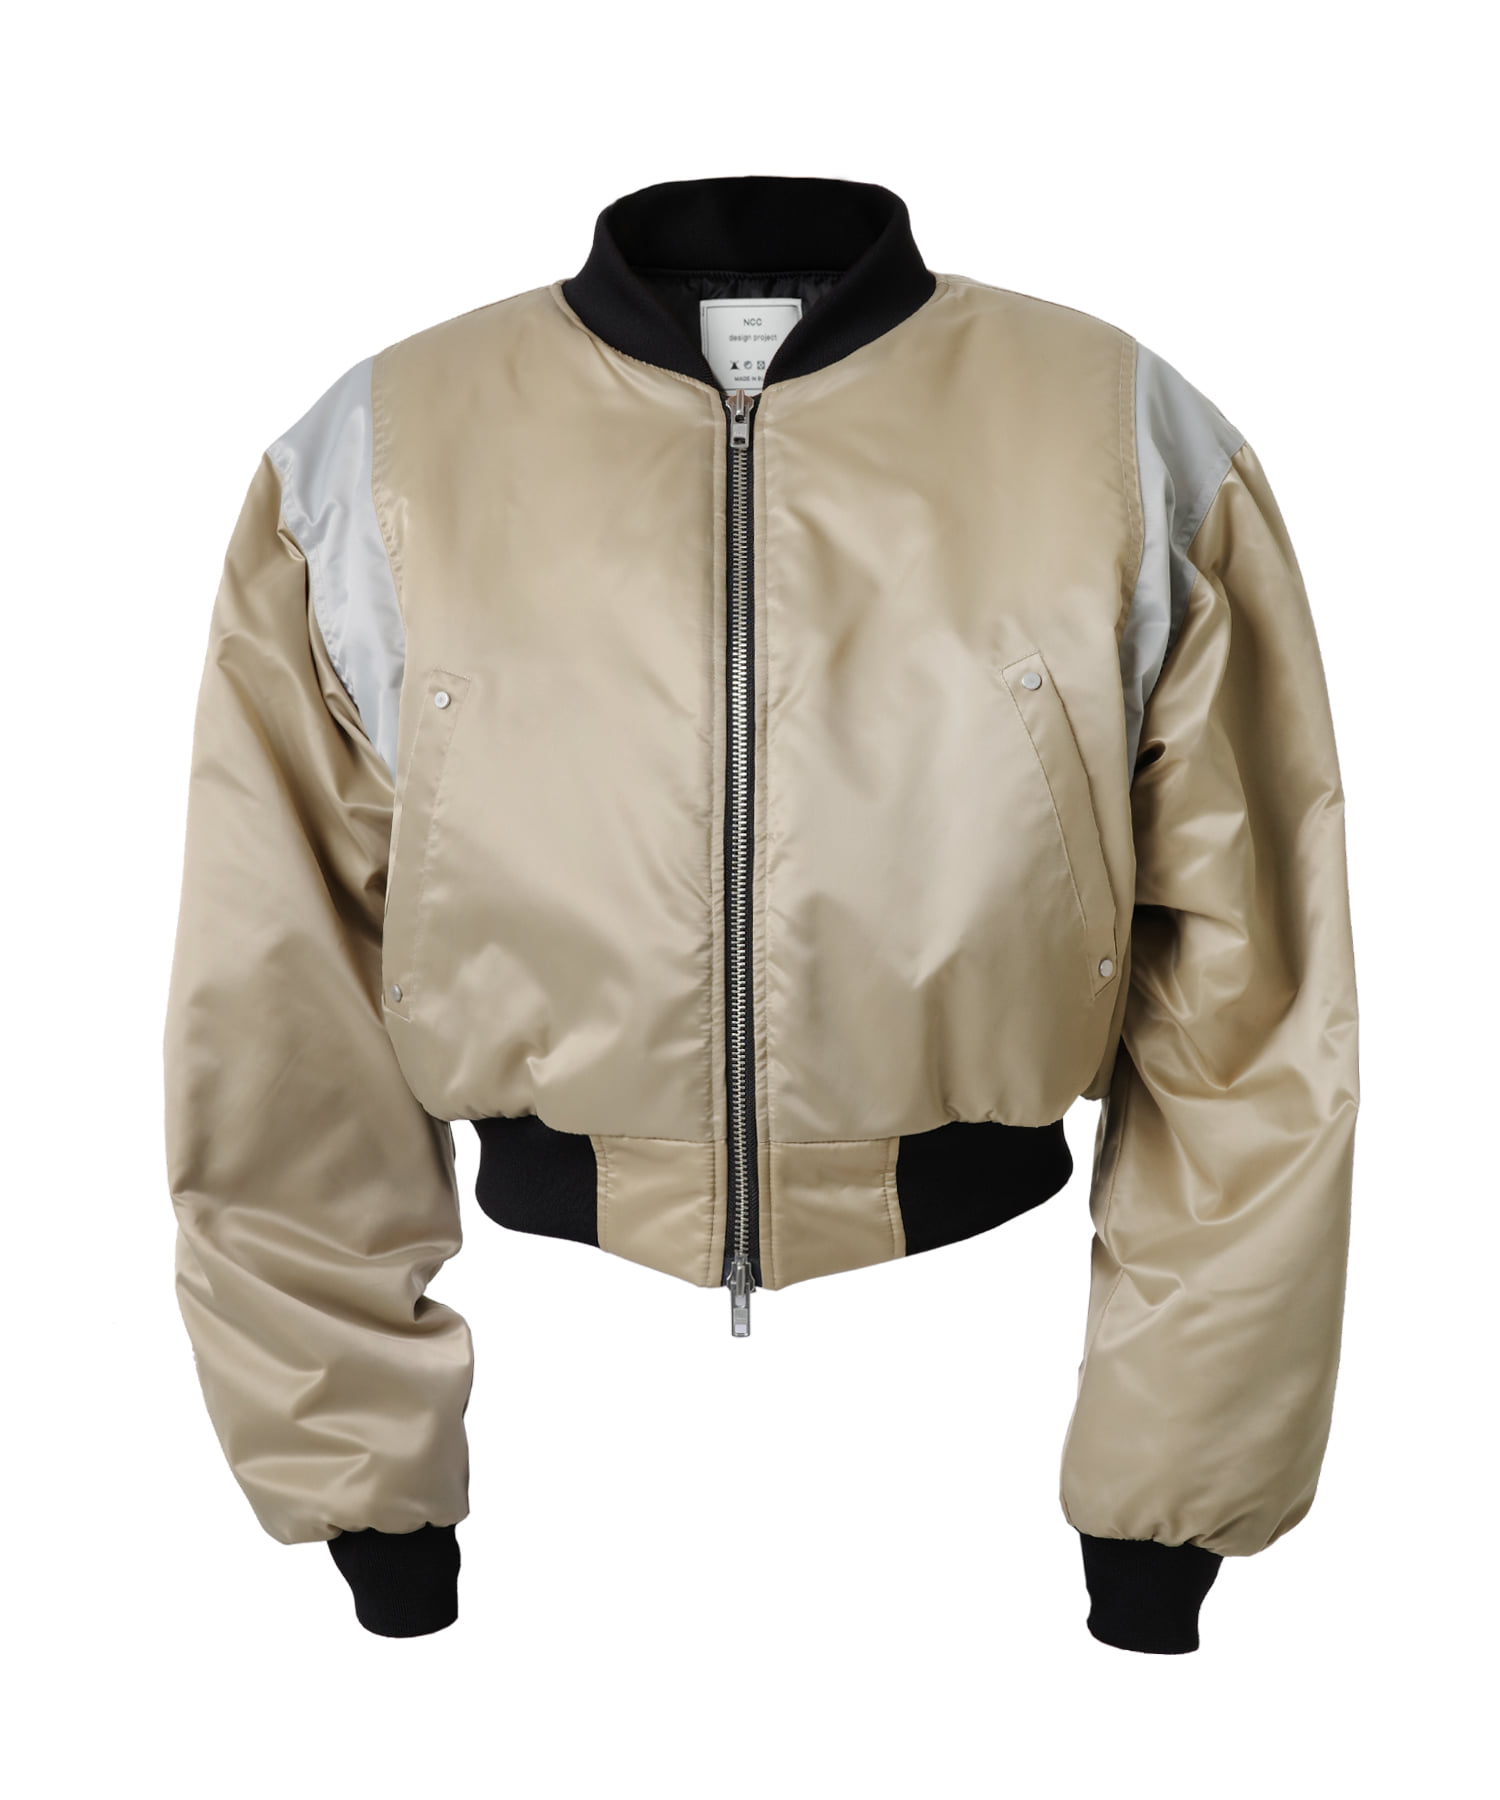 DP-090 ( hell boy bomber jacket gold silver ) 1차 재입고